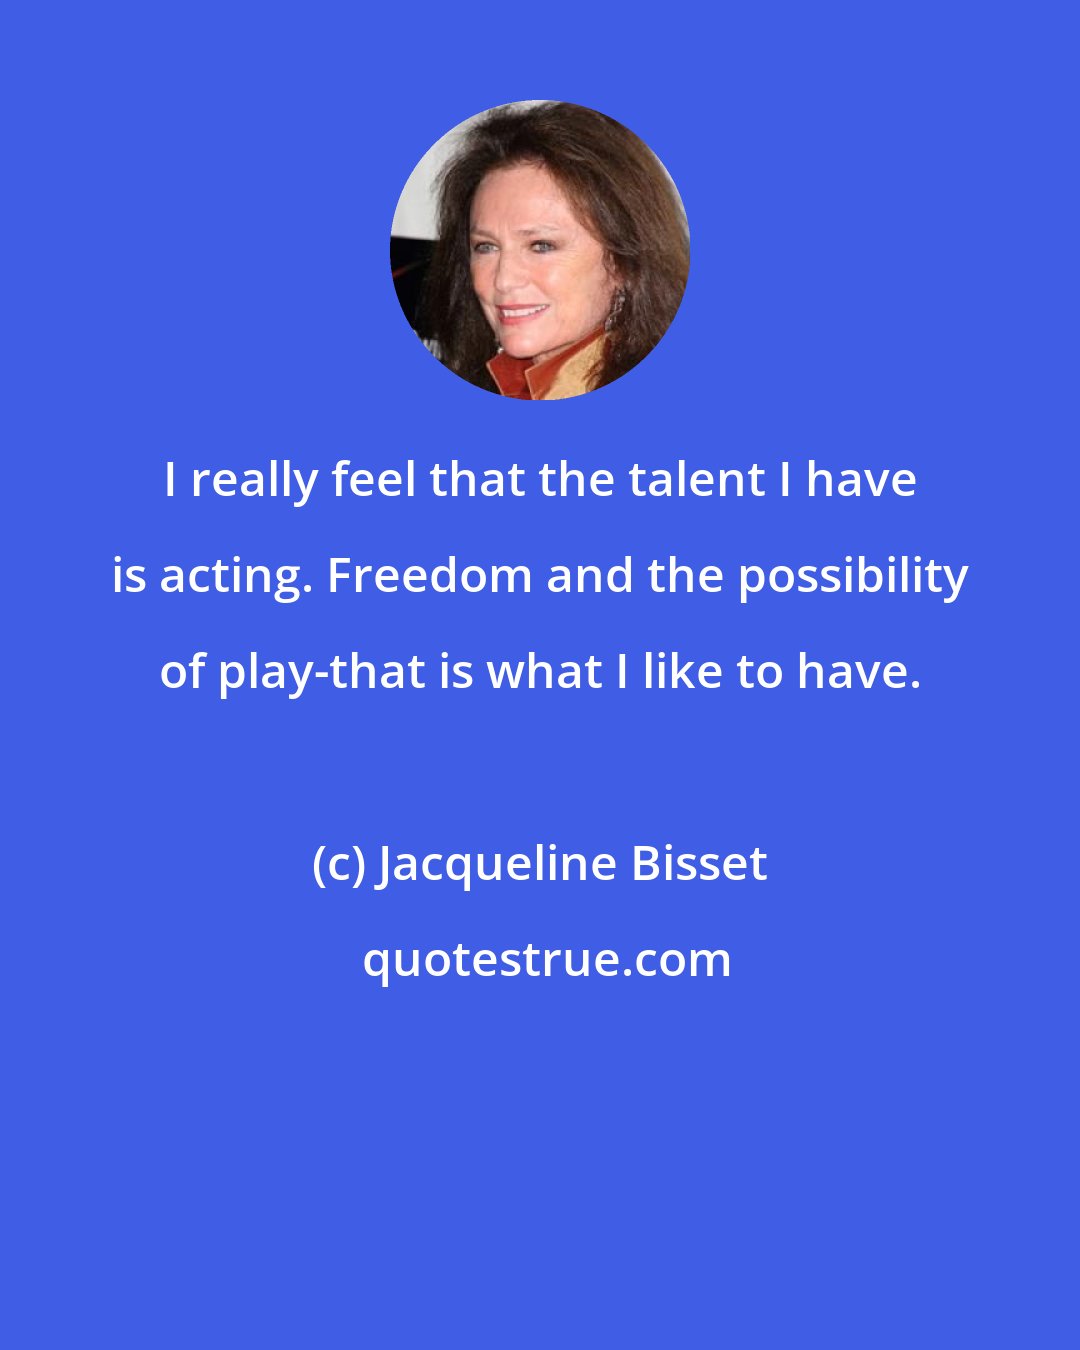 Jacqueline Bisset: I really feel that the talent I have is acting. Freedom and the possibility of play-that is what I like to have.